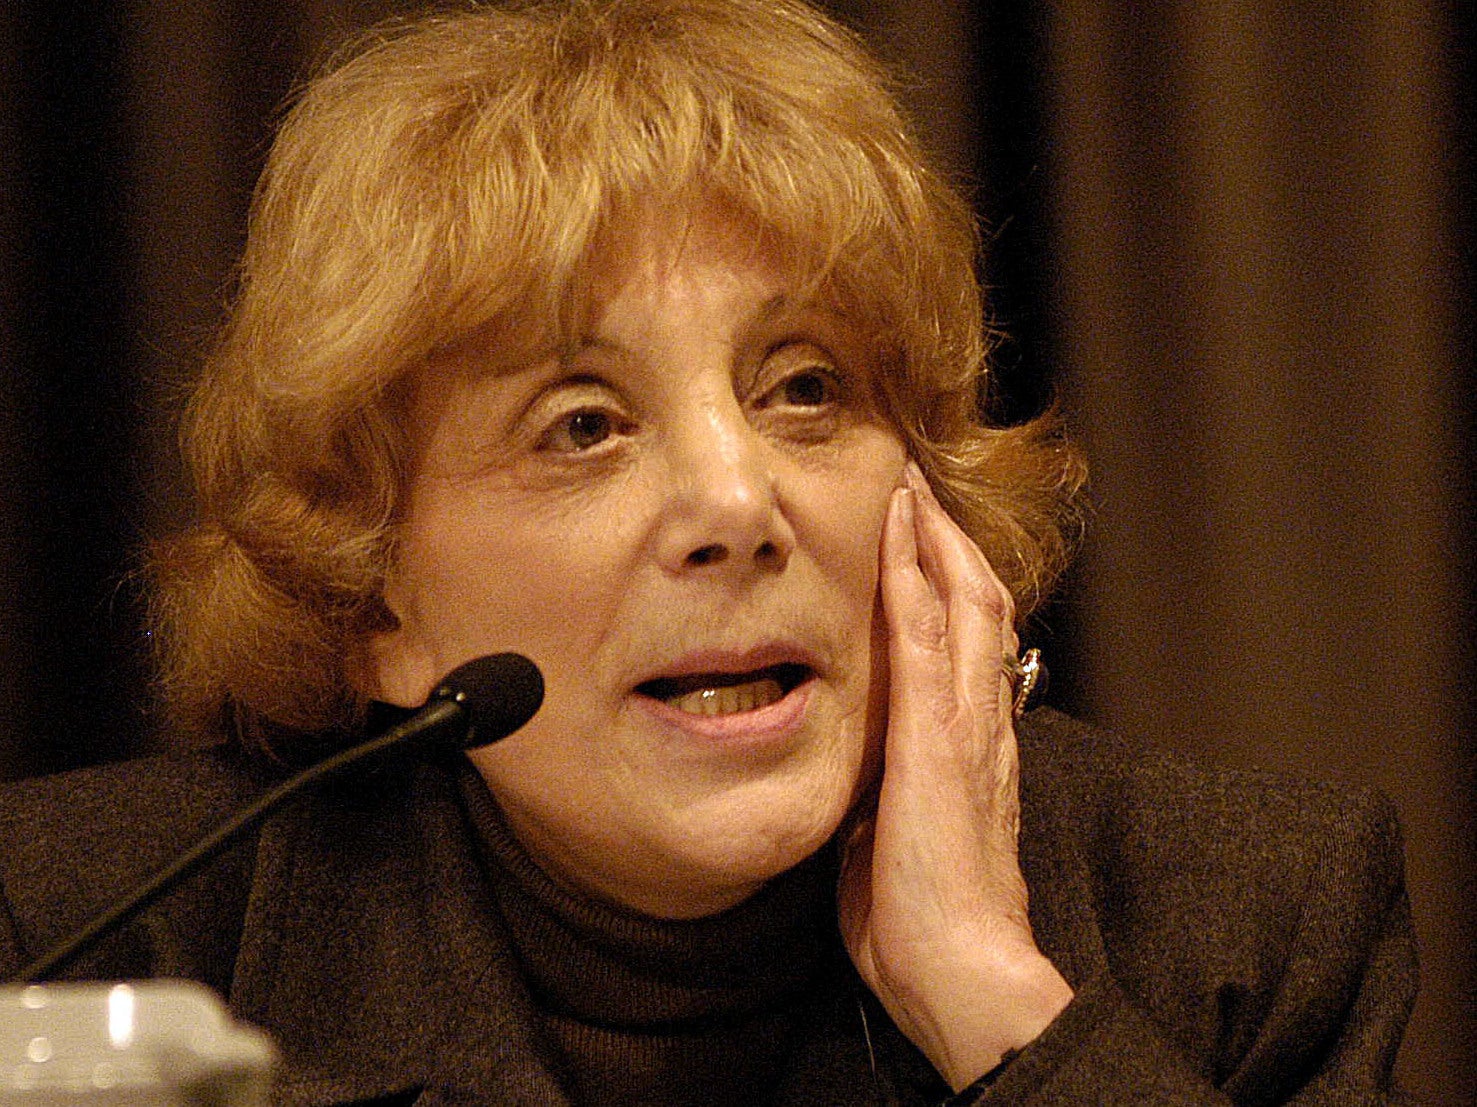 Davis speaks at a roundtable on director nominations at the Securities and Exchange Commission in Washington in 2004